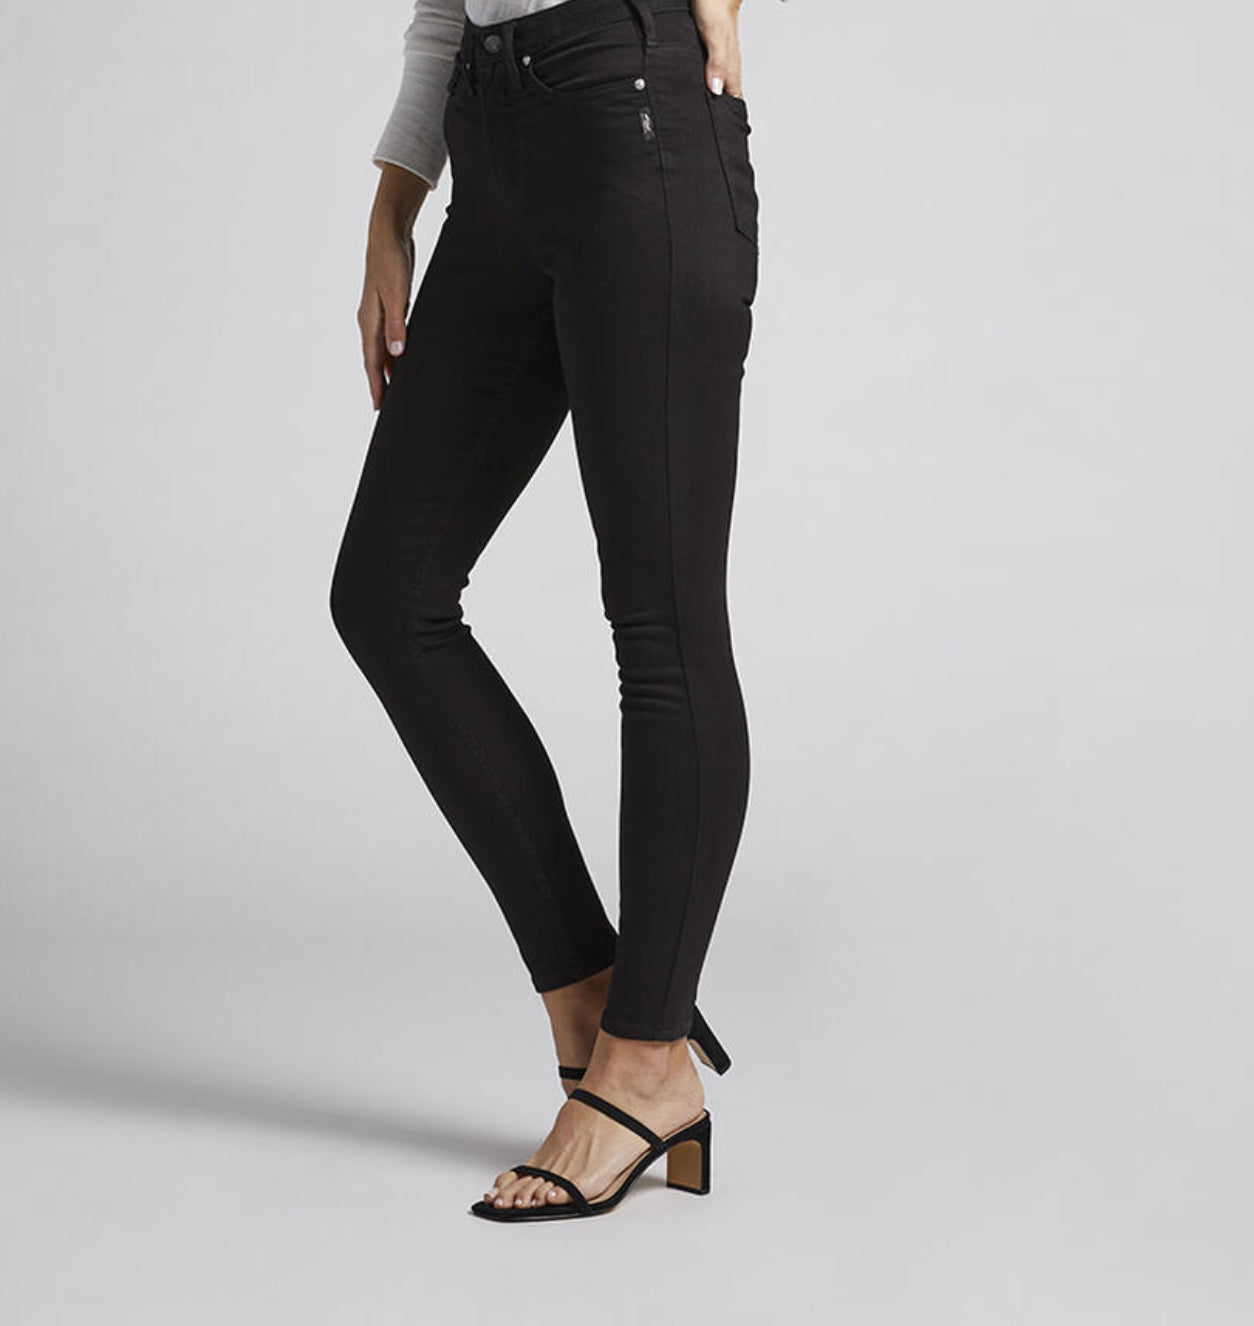 Silver Jeans - Infinite Fit High - Black - XSMALL